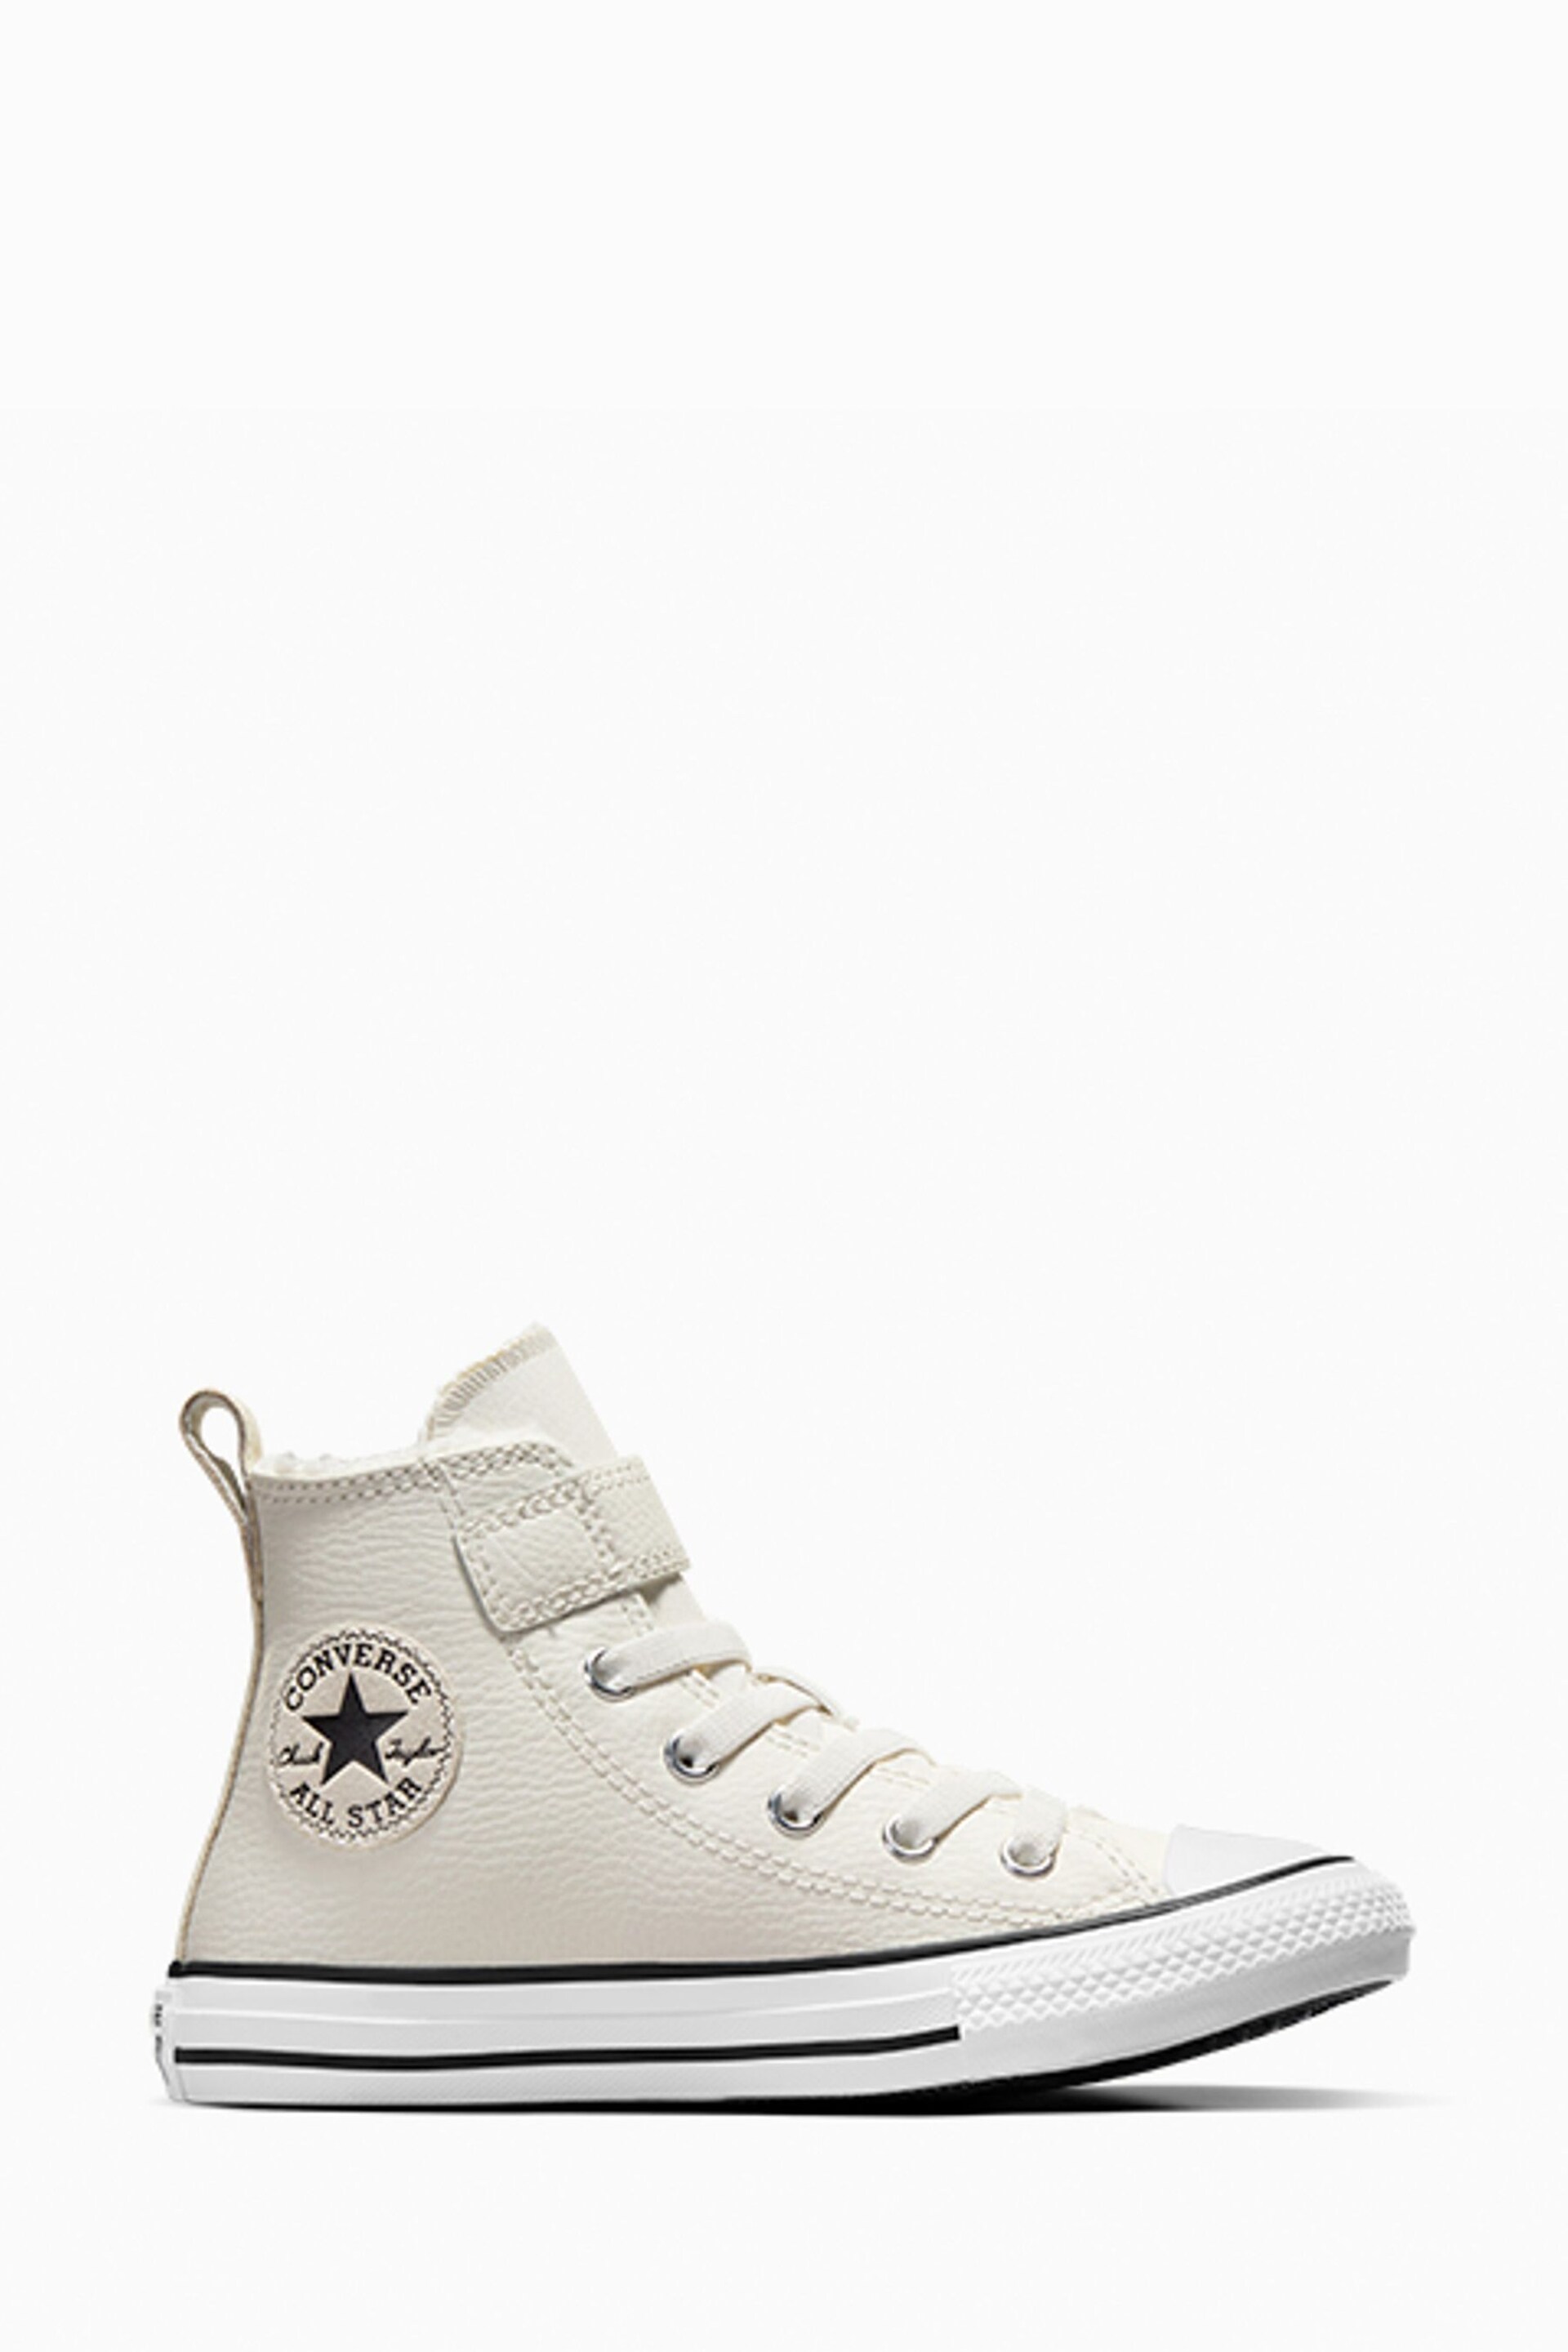 Converse White Easy On Leather Fleece Lined Junior Trainers - Image 1 of 9